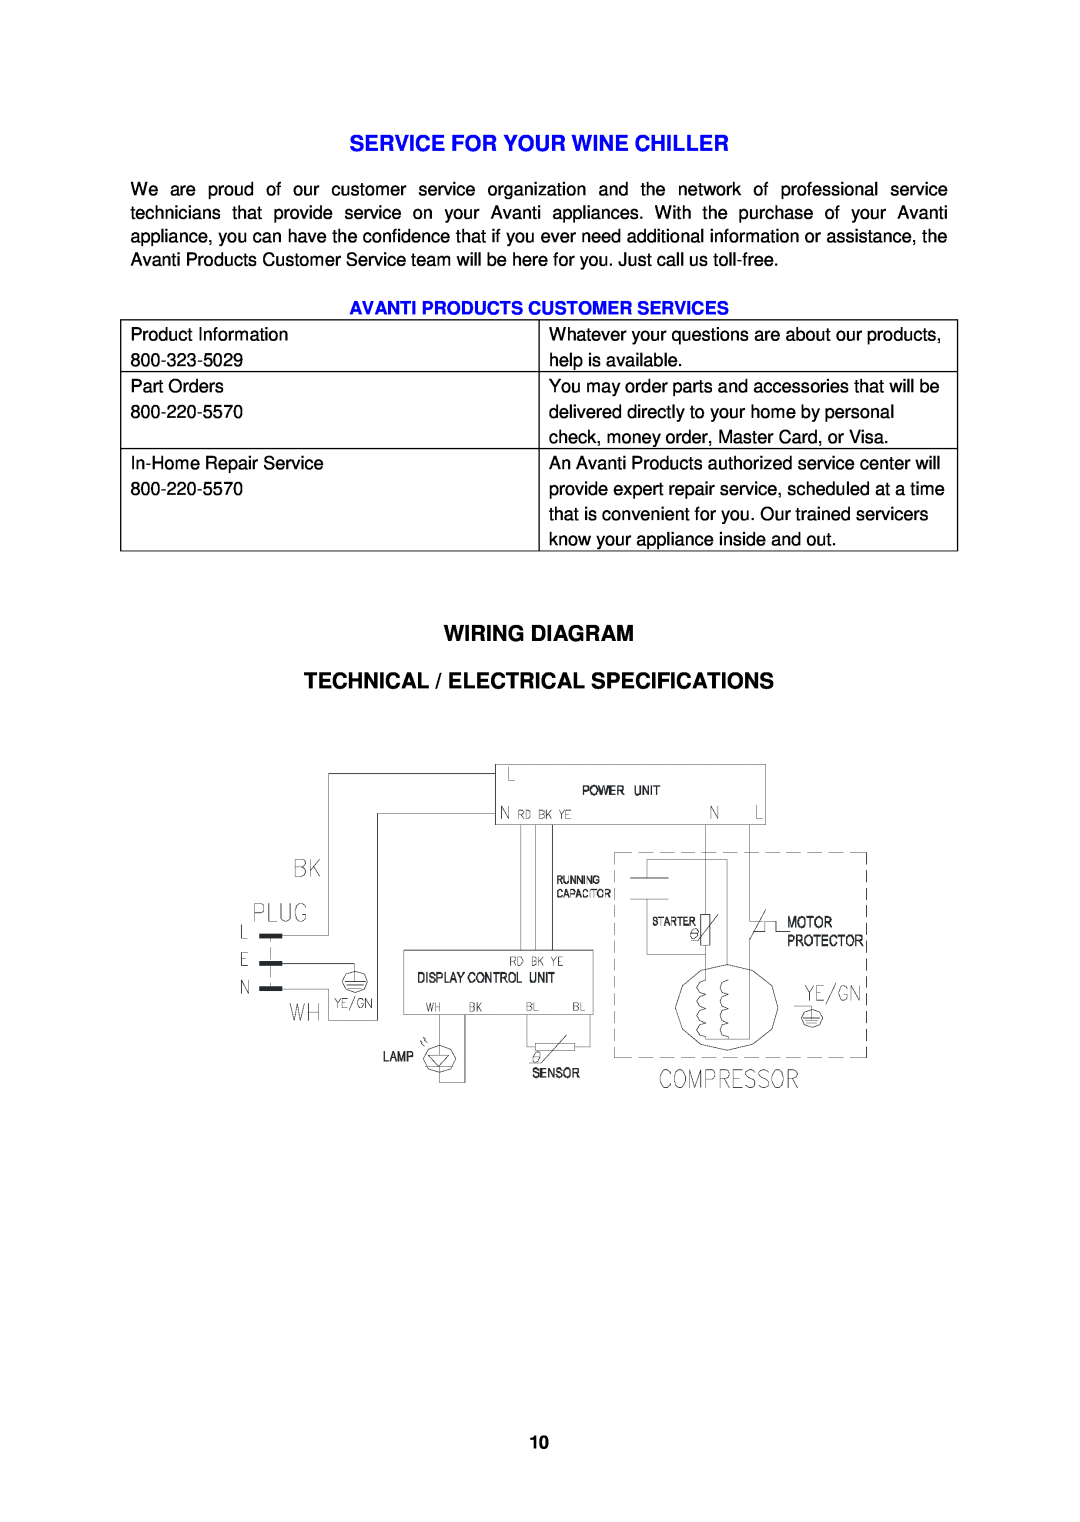 Avanti WC31 instruction manual Service For Your Wine Chiller, Wiring Diagram Technical / Electrical Specifications 